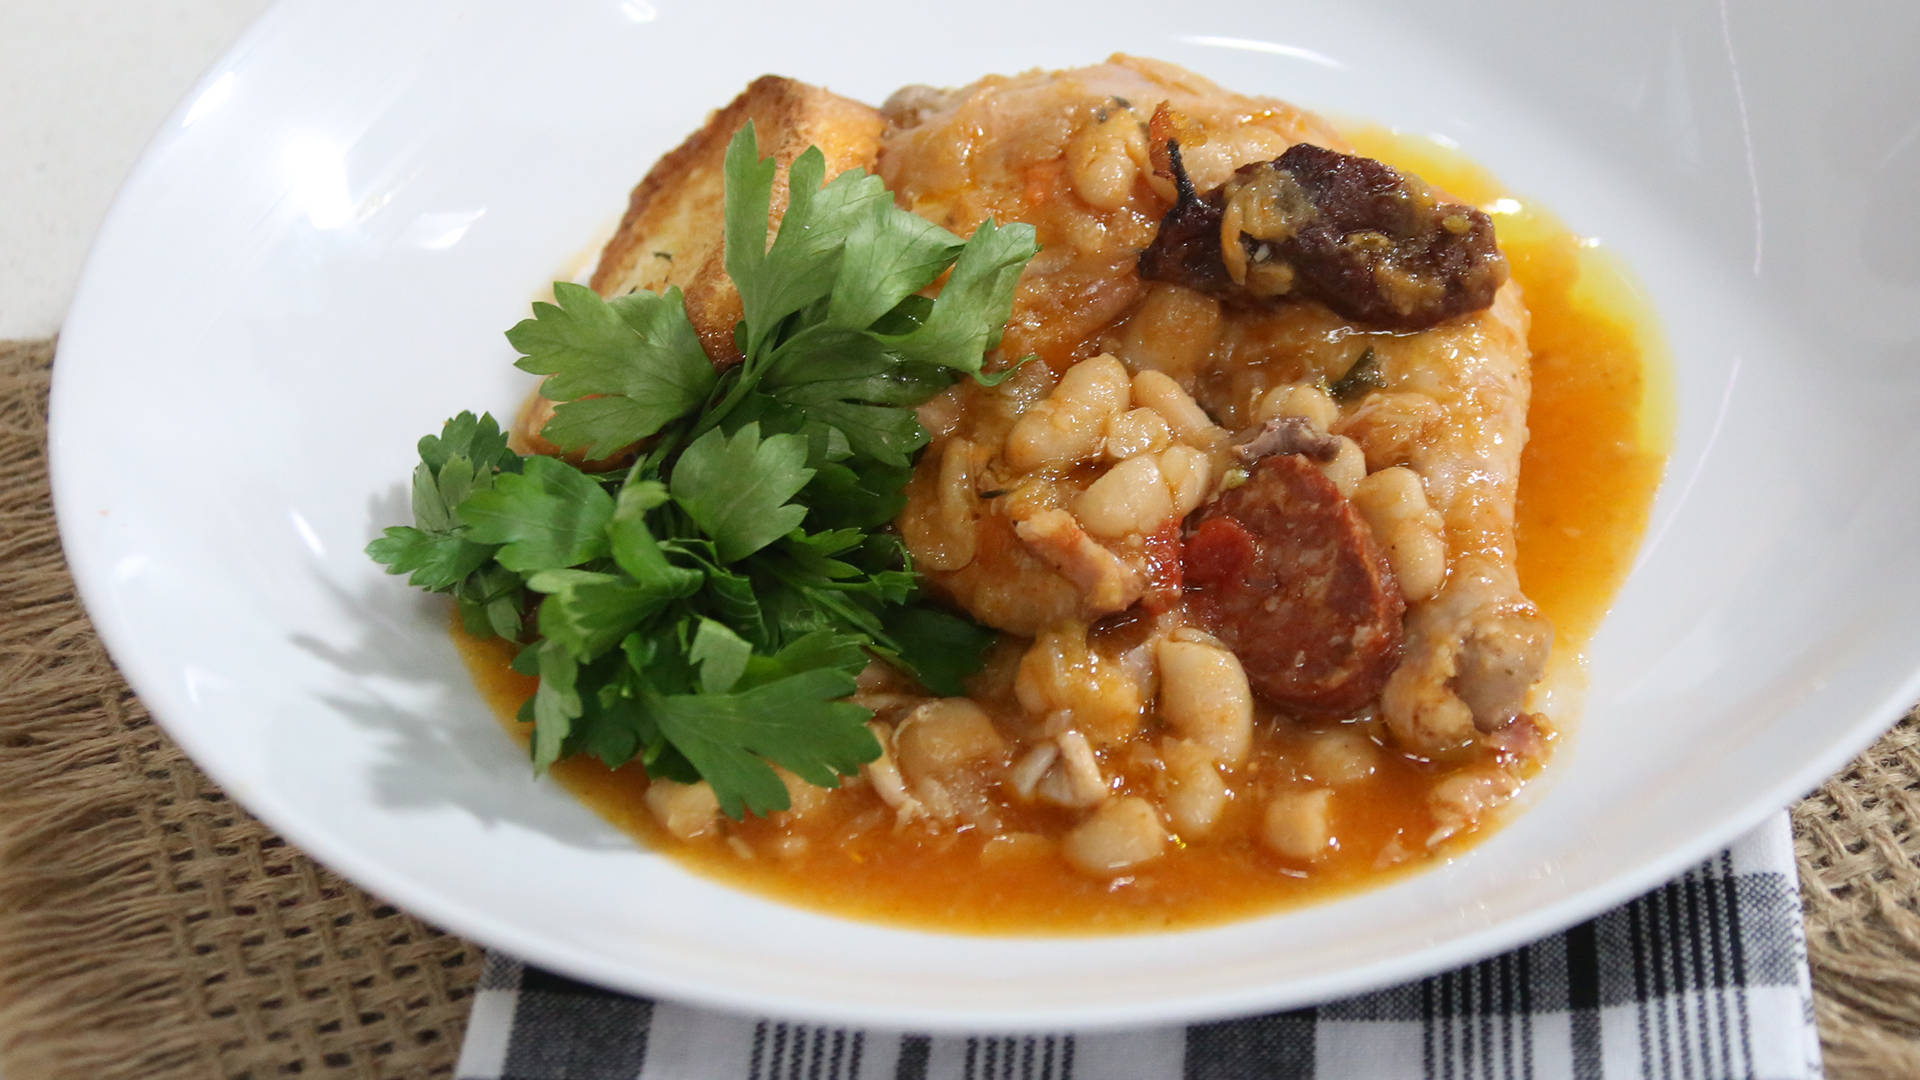 "Delicious Cassoulet Dish Garnished with Parsley and Crostini" Wallpaper